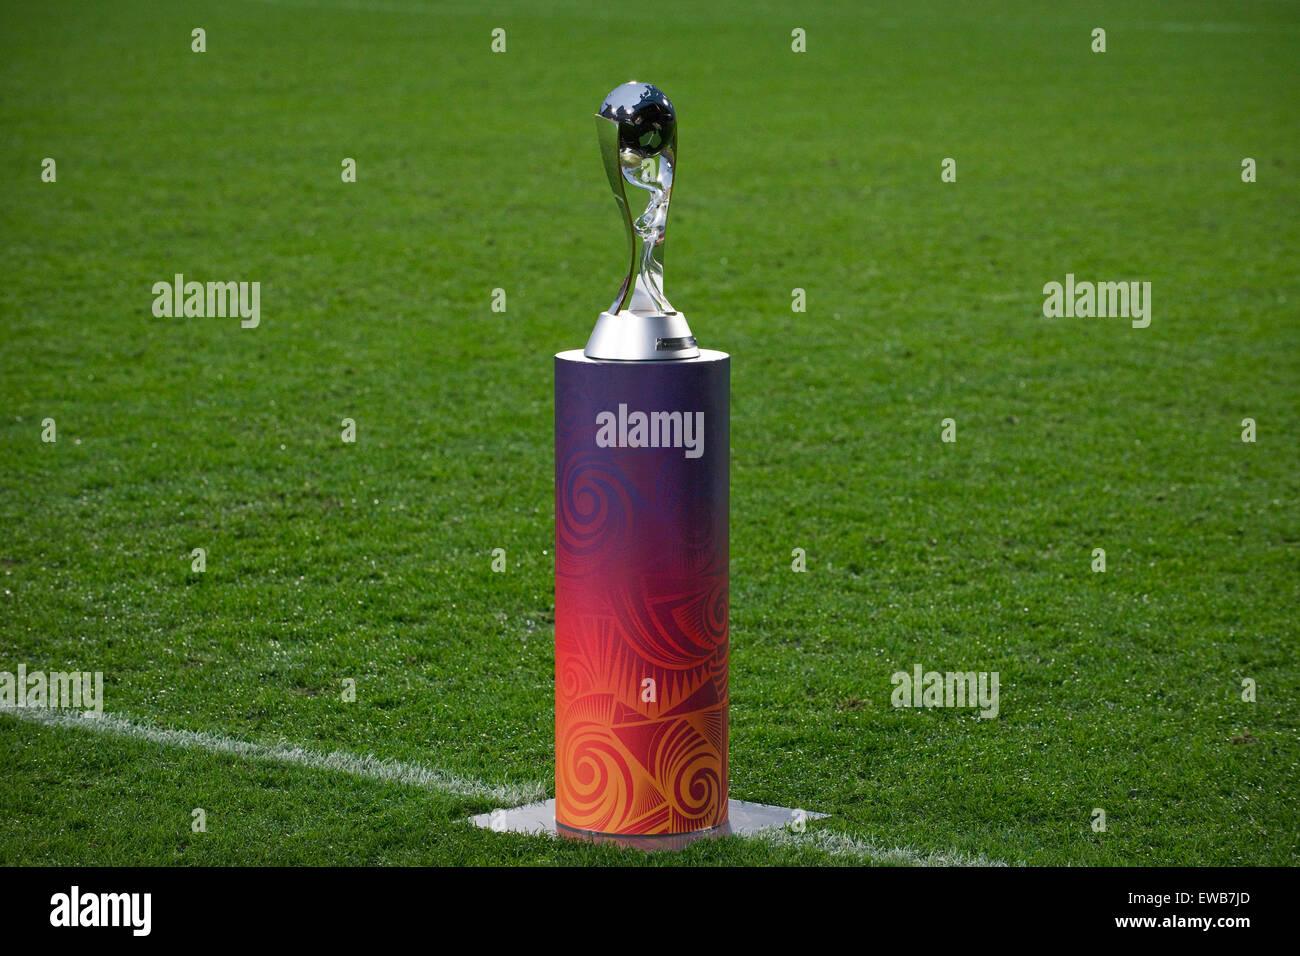 Auckland, New Zealand, Feature. 20th June, 2015. Auckland, New Zealand - June 20, 2015 - The FIFA U20 World Cup Trophy is displayed ahead of the FIFA U20 World Cup final match between Brazil and Serbia at North Harbour Stadium on June 20, 2015 in Auckland, New Zealand, Feature. Credit:  dpa/Alamy Live News Stock Photo